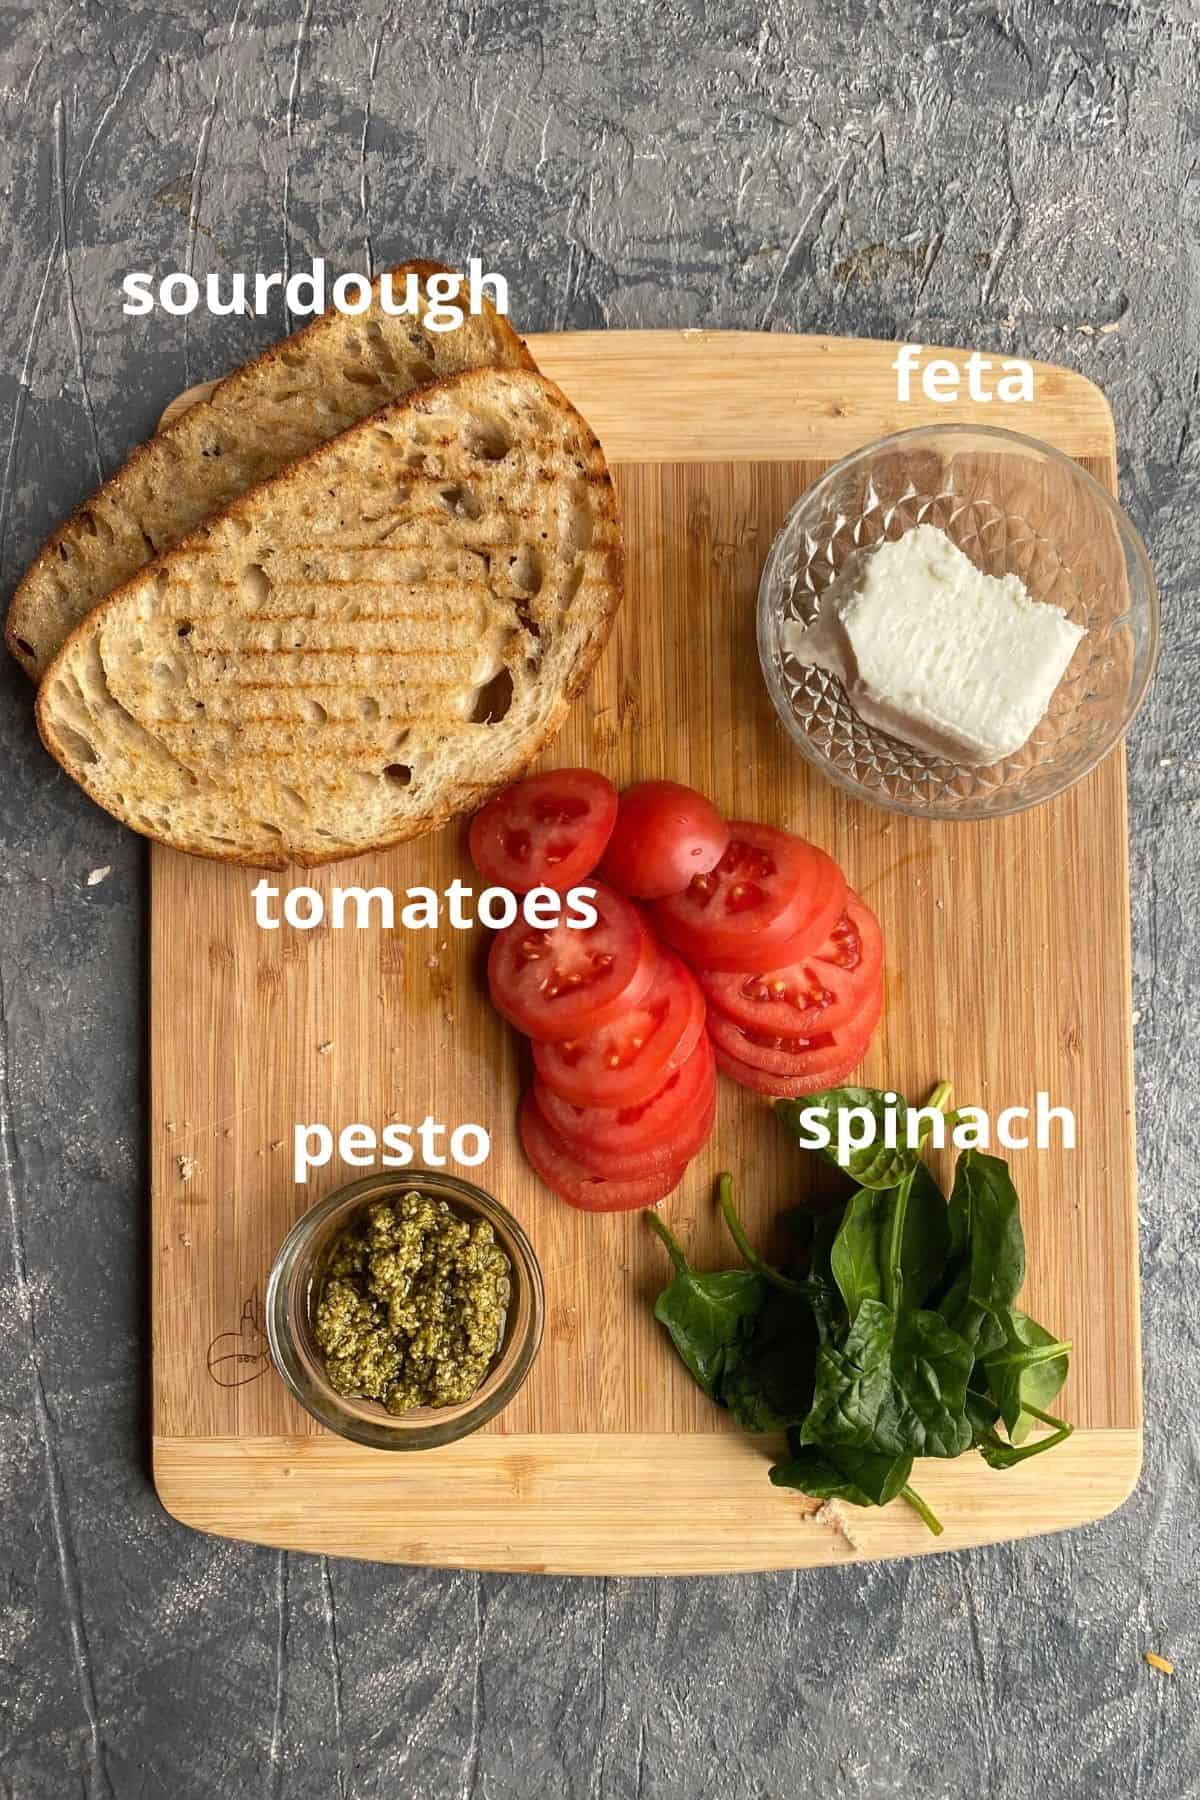 An overhead view of the ingredients to make a grilled cheese sandwich; sourdough, feta, tomatoes, spinach, and pesto